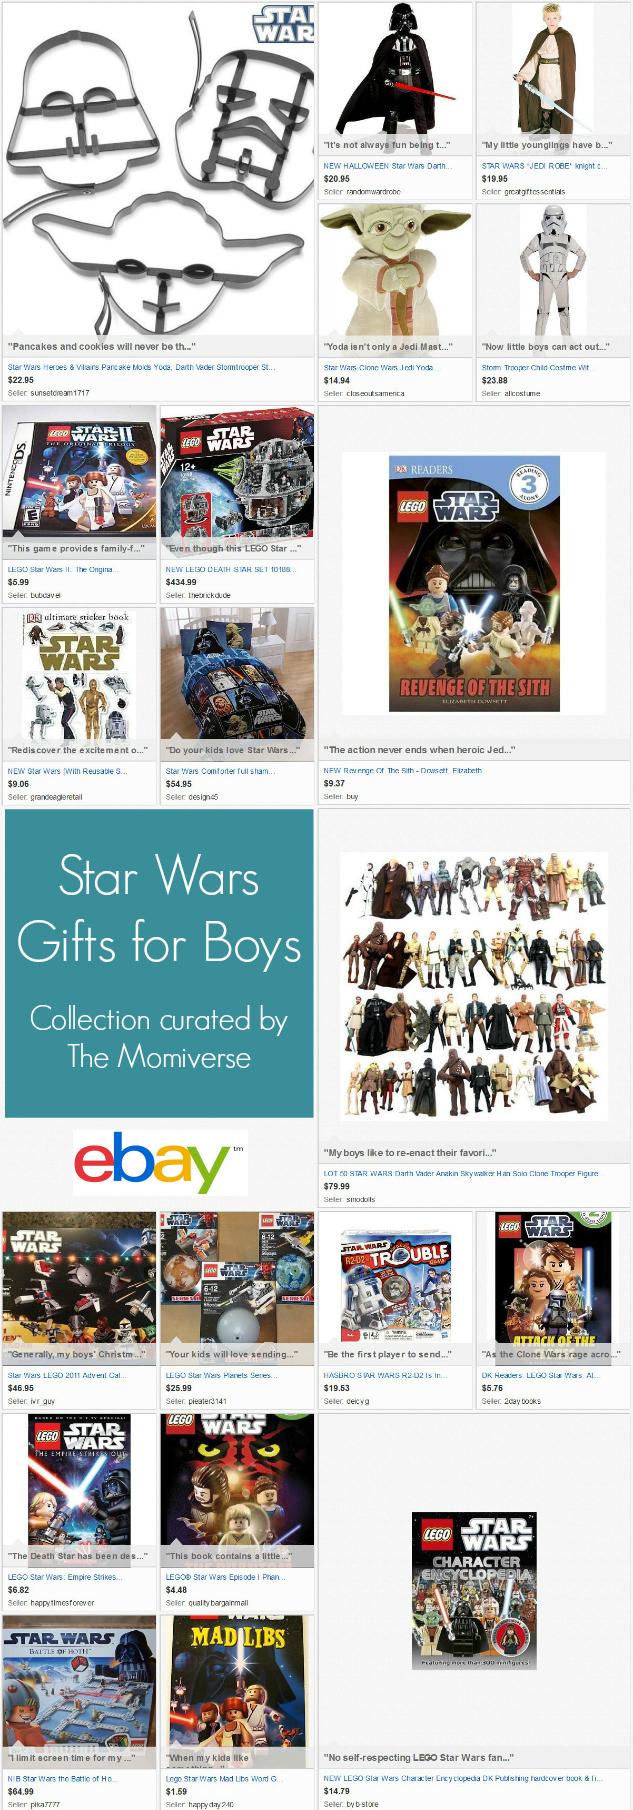 Star Wars Gifts for Boys | | eBay Collection curated by The Momiverse | Gift Guide